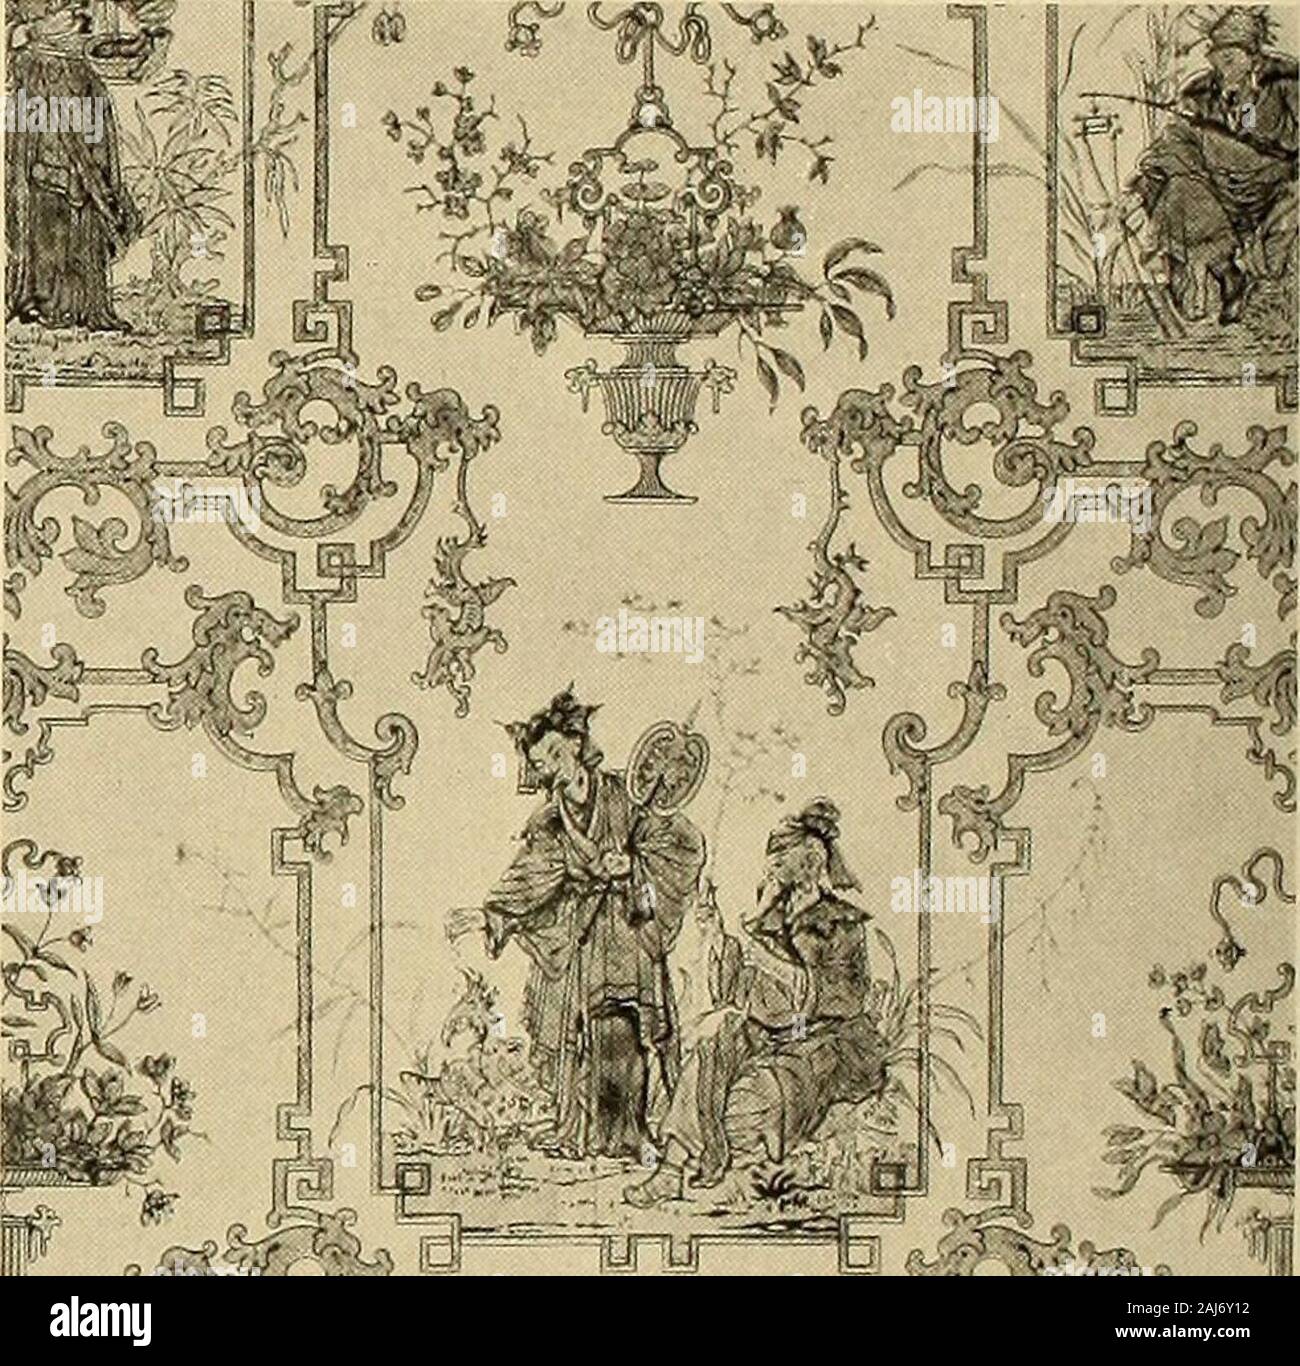 Decorative textiles; an illustrated book on coverings for furniture, walls and floors, including damasks, brocades and velvets, tapestries, laces, embroideries, chintzes, cretonnes, drapery and furniture trimmings, wall papers, carpets and rugs, tooled and illuminated leathers . *l* Stock Photo